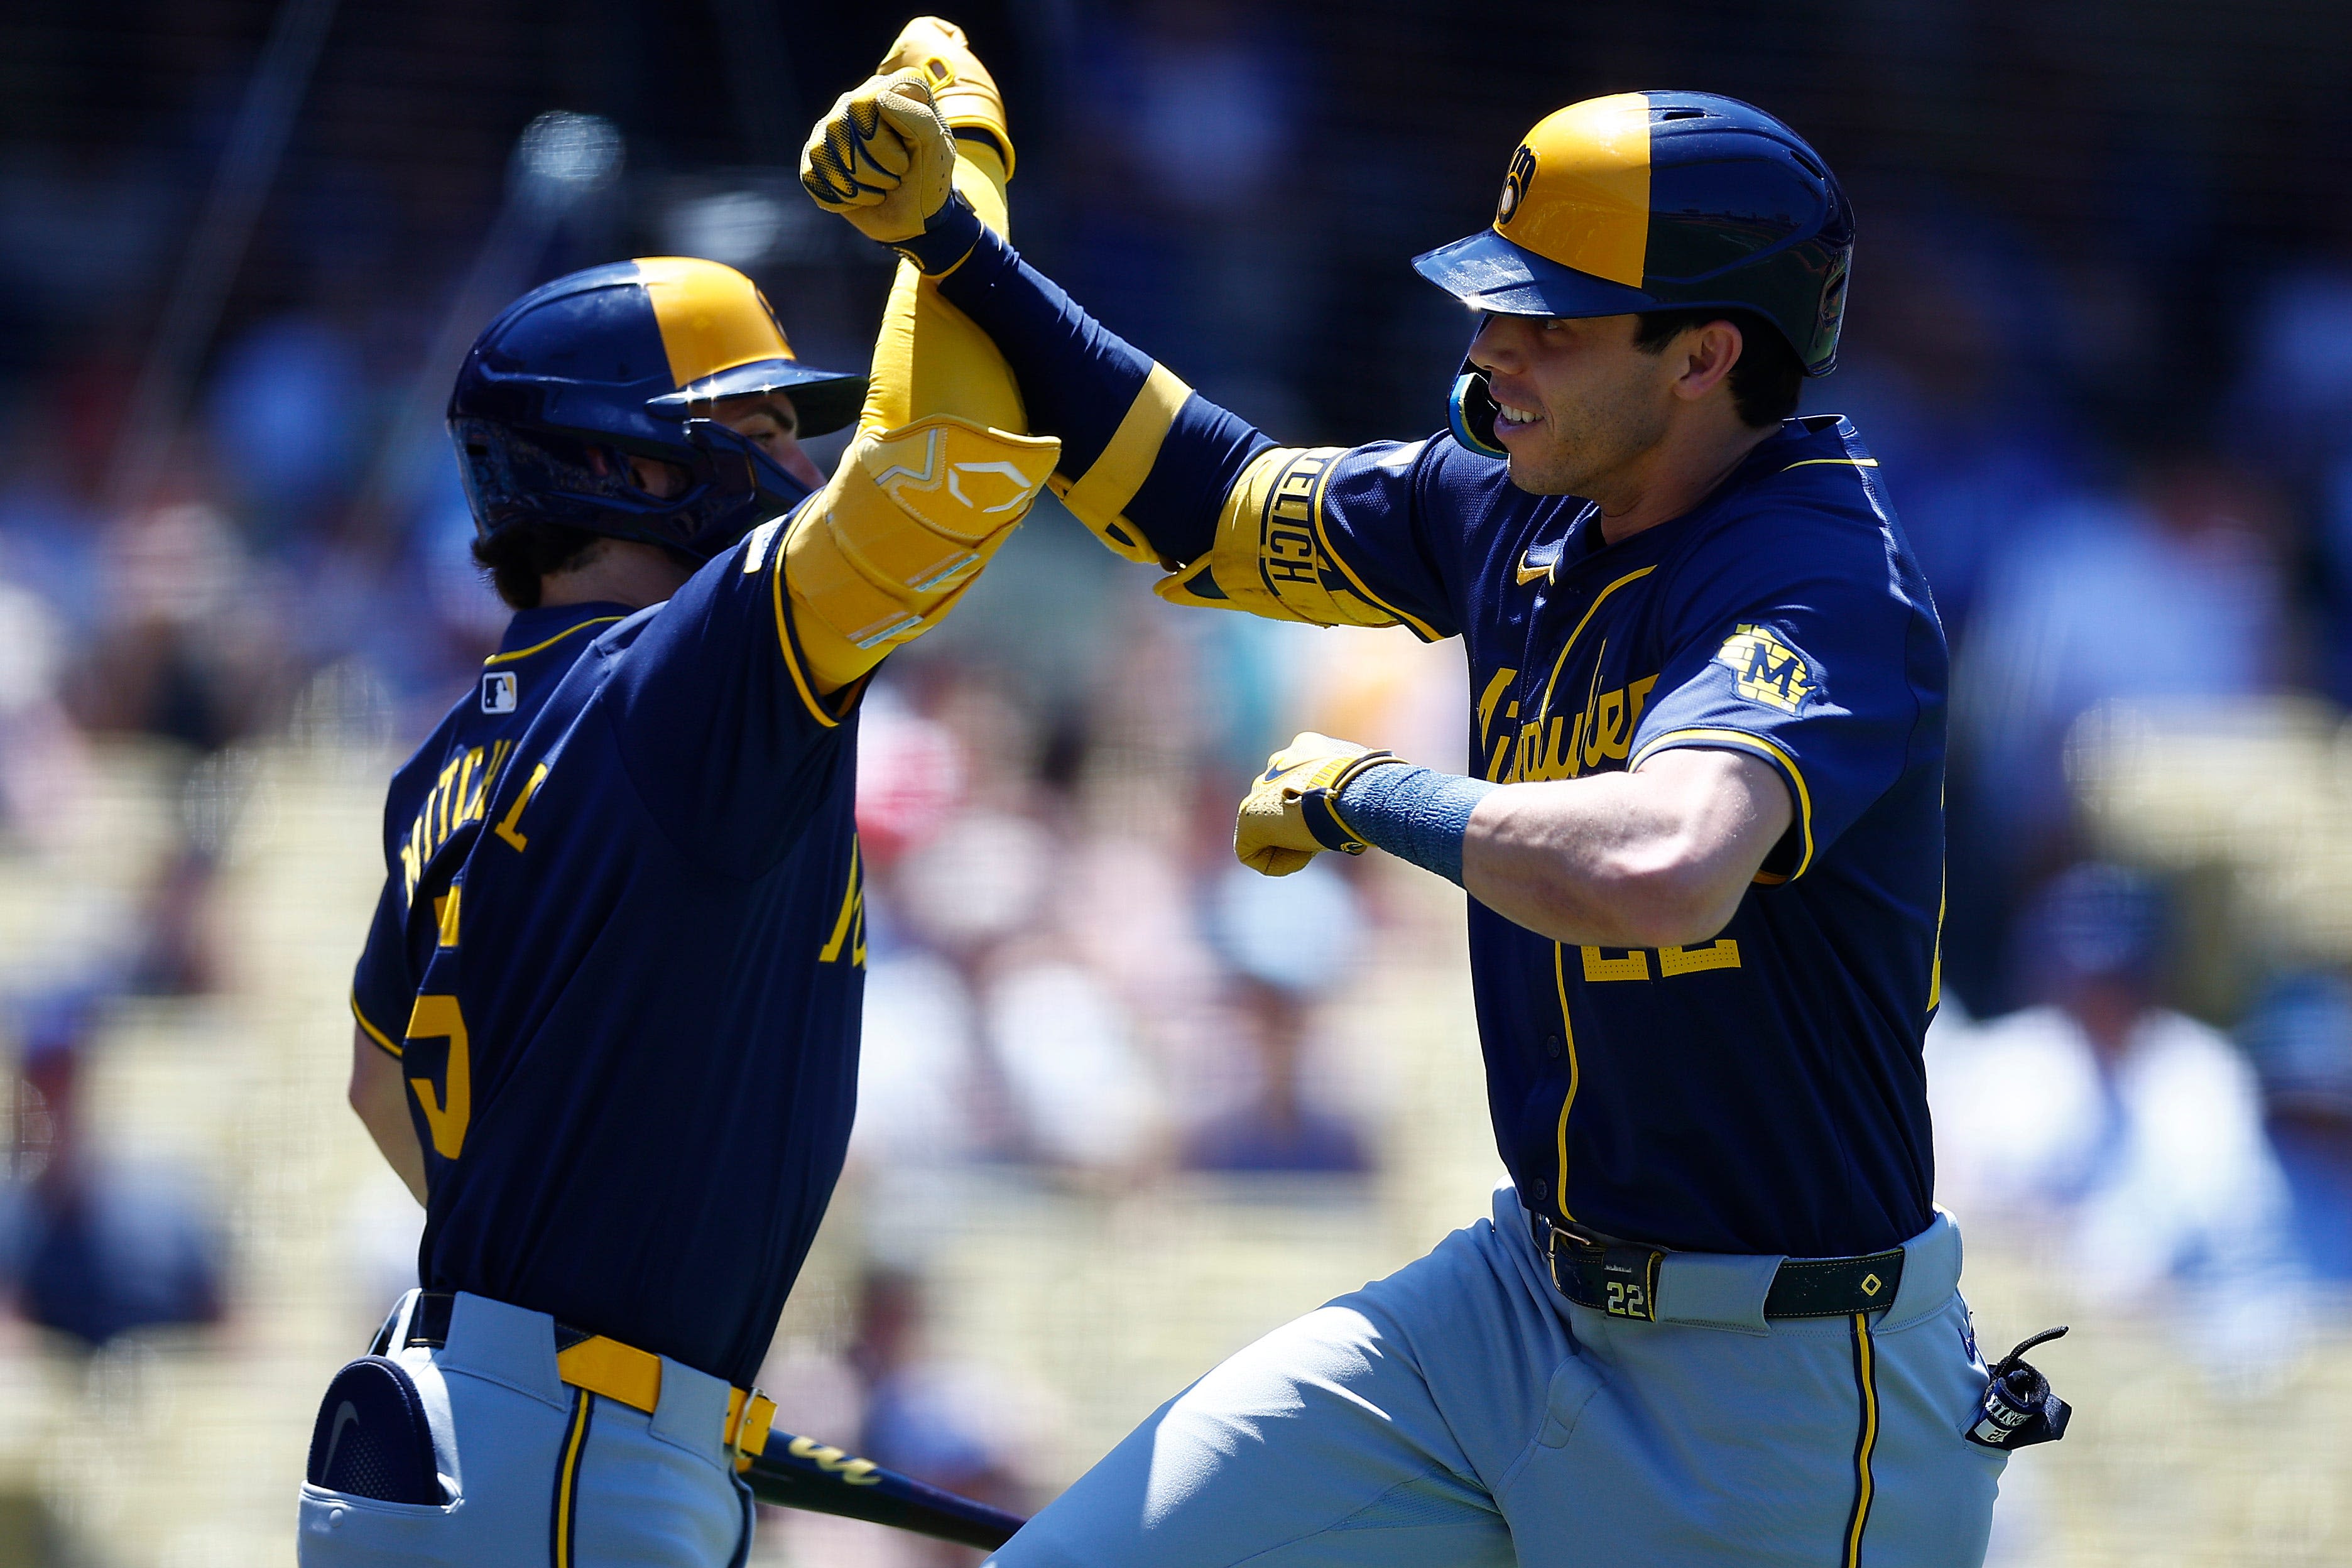 Christian Yelich is back to playing at a level eerily similar to his MVP season. Seriously.